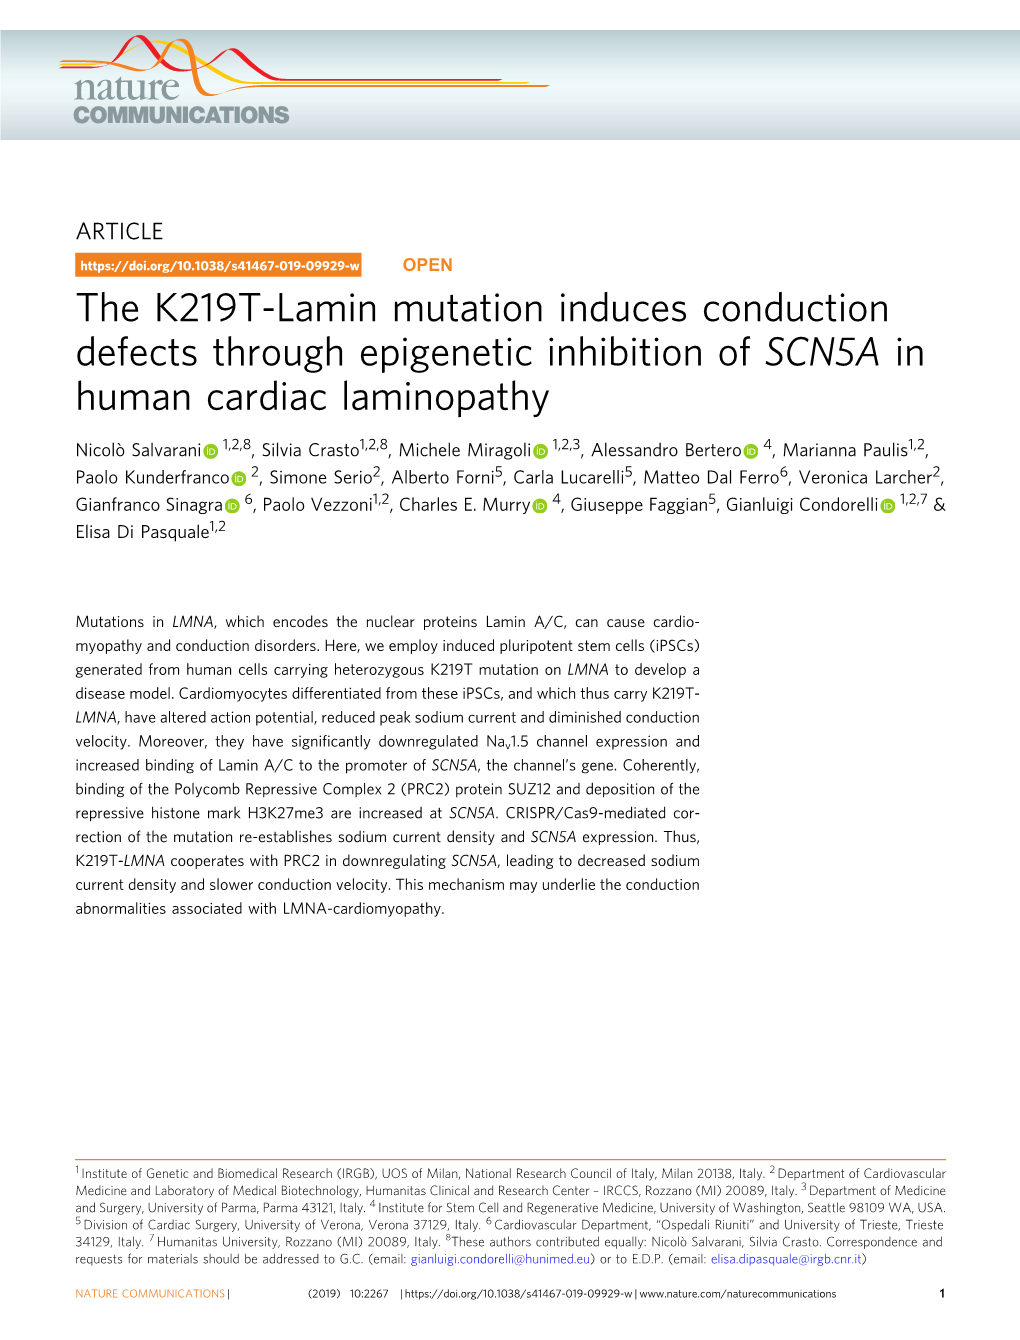 The K219T-Lamin Mutation Induces Conduction Defects Through Epigenetic Inhibition of SCN5A in Human Cardiac Laminopathy